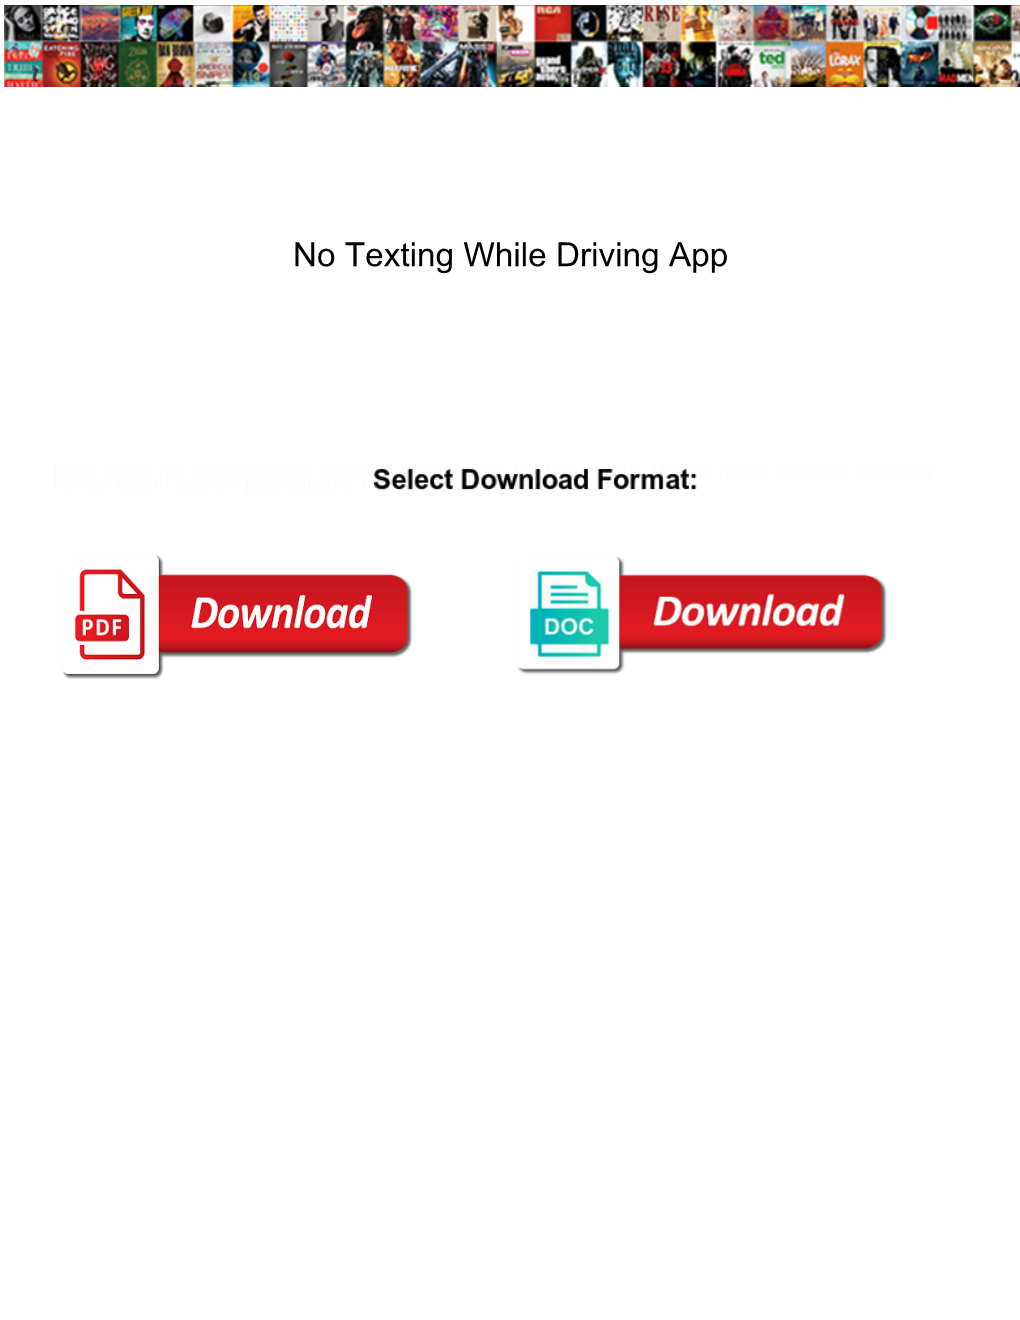 No Texting While Driving App